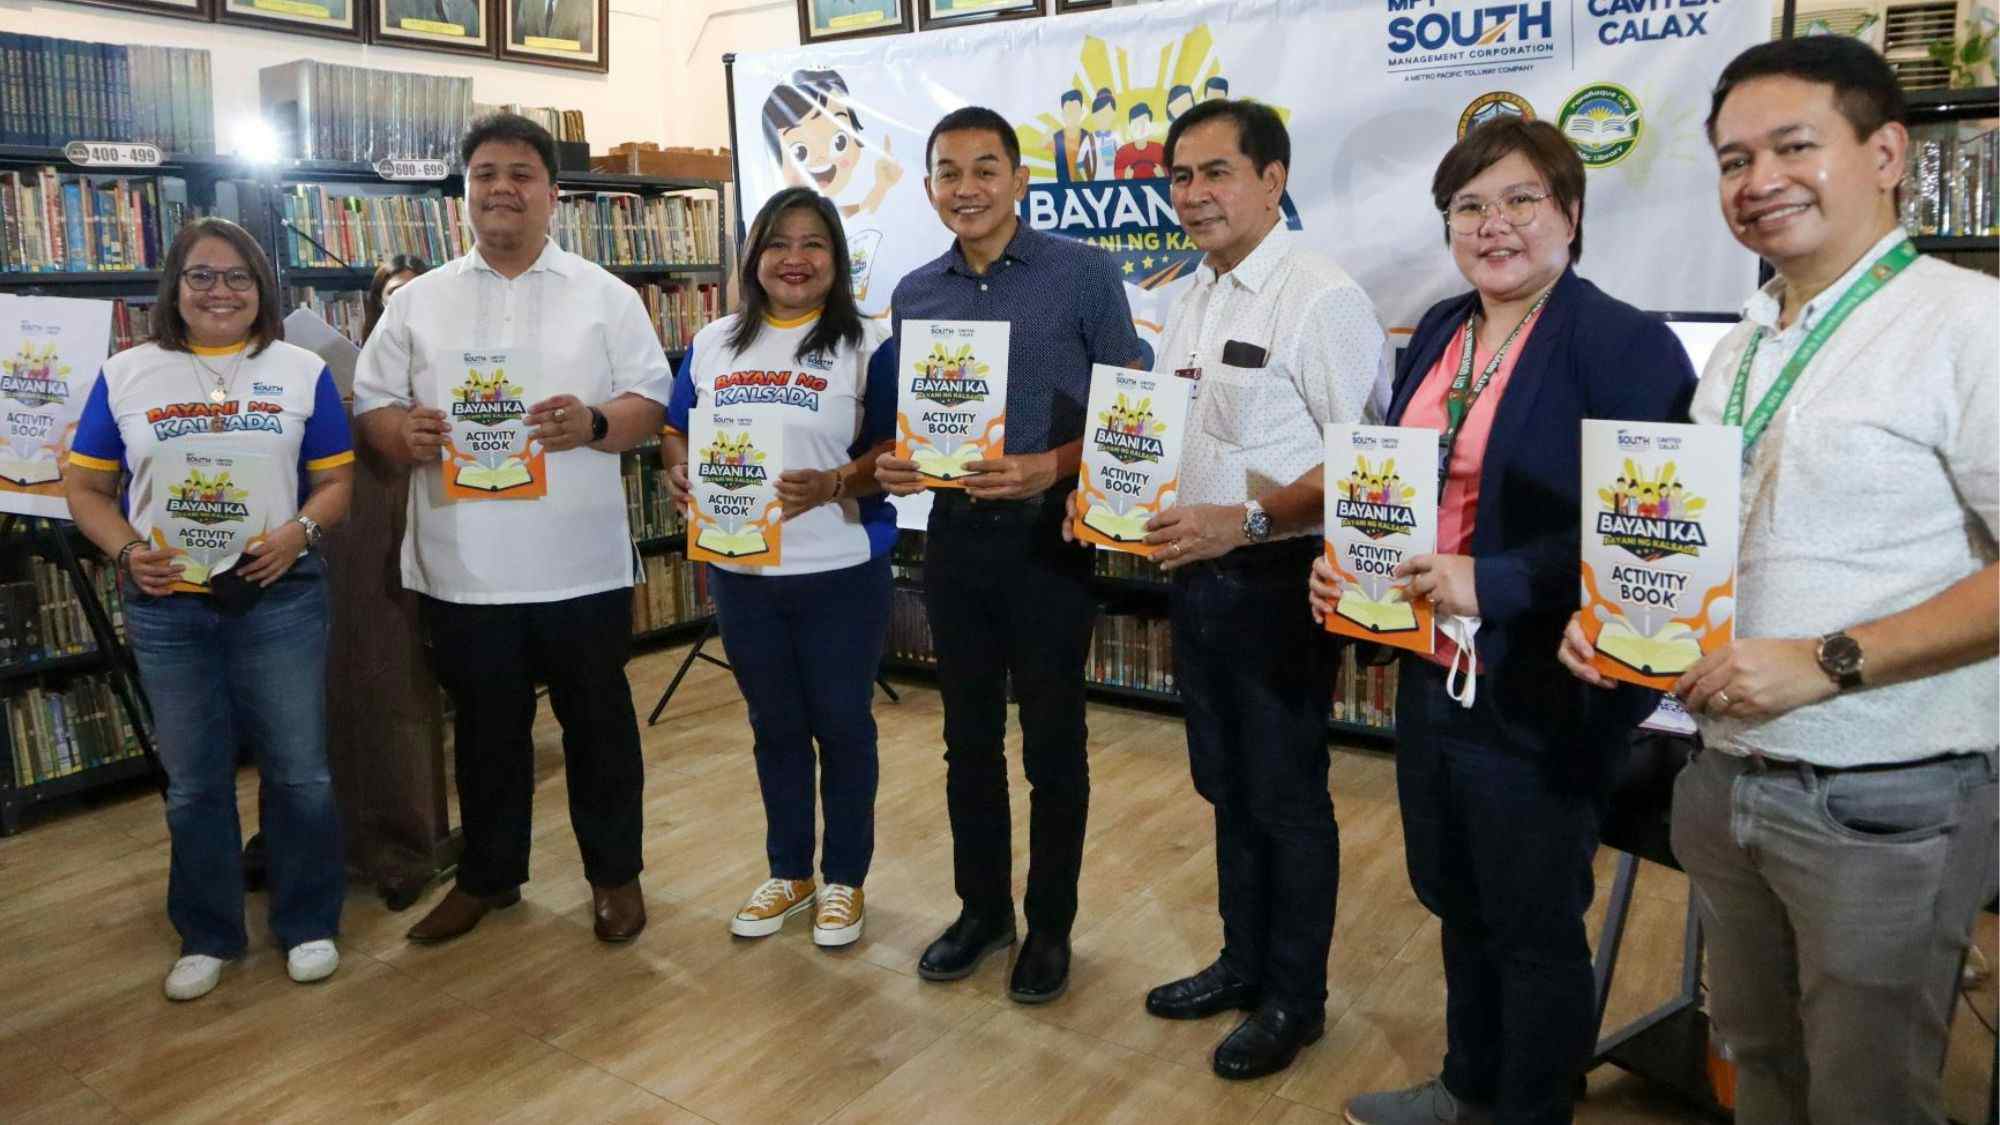 MPC South promotes road safety with ‘Bayani Ka’ activity book